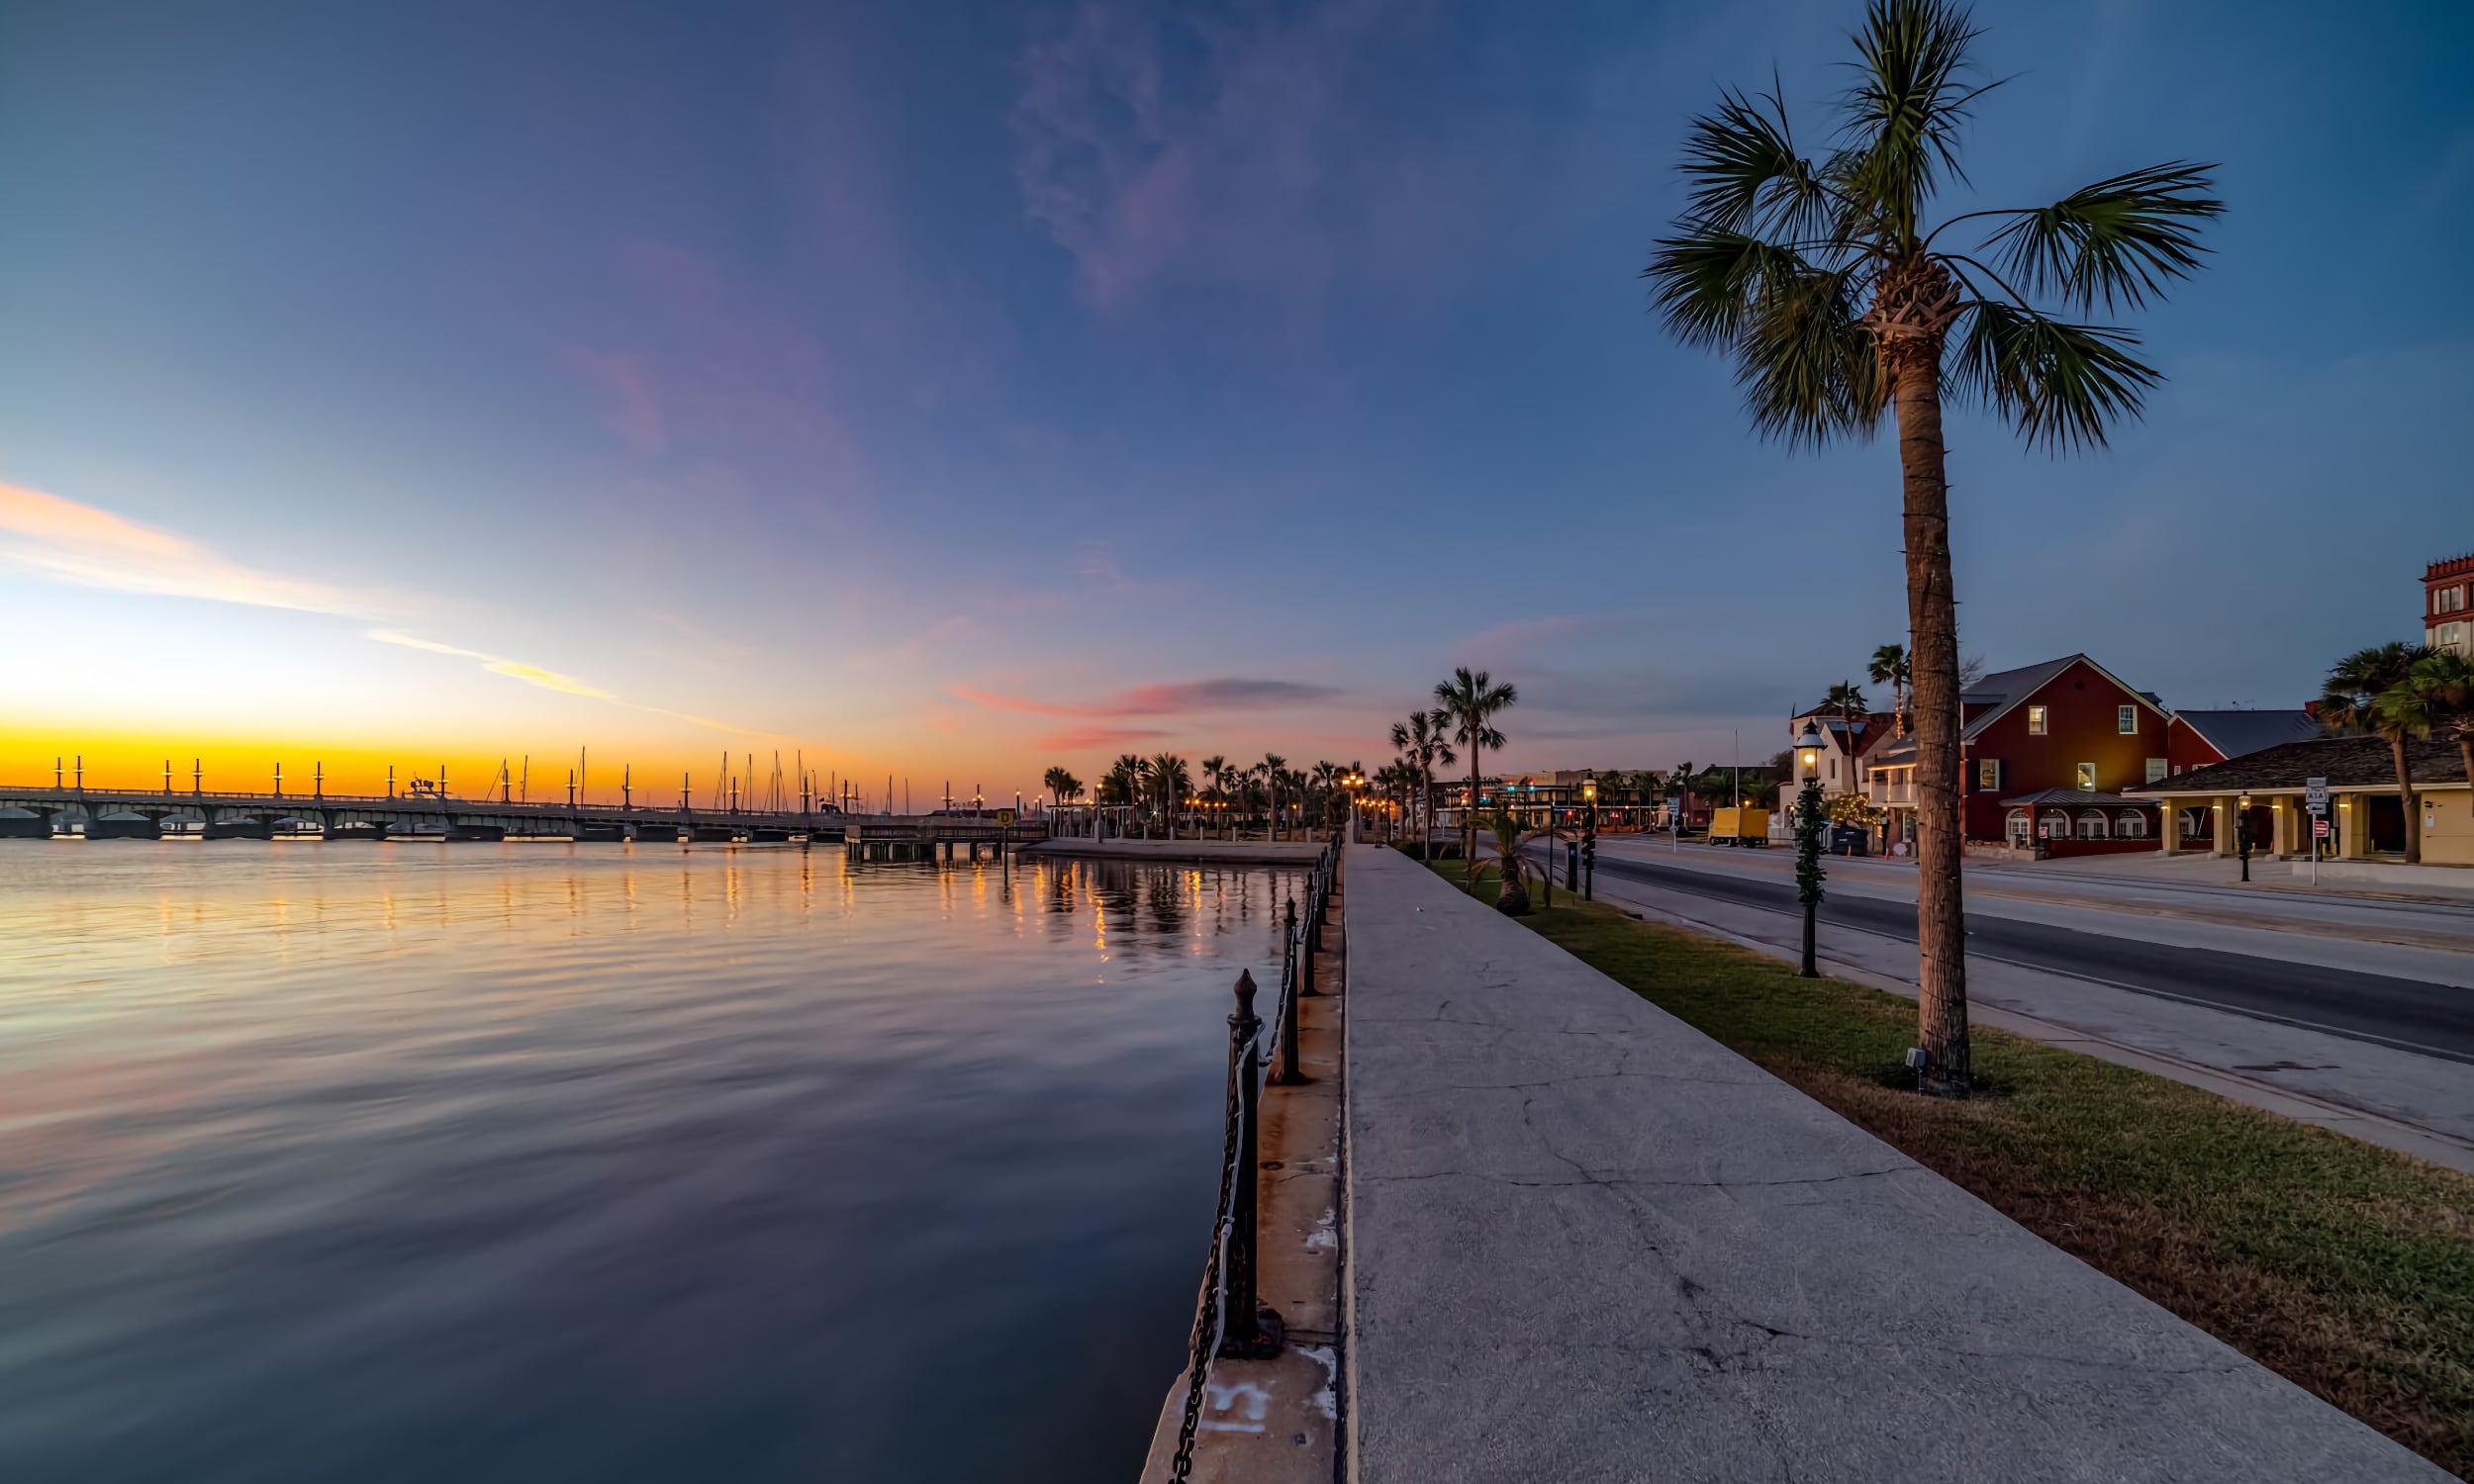 Sunset casts warm hues over the calm waters of the bayfront